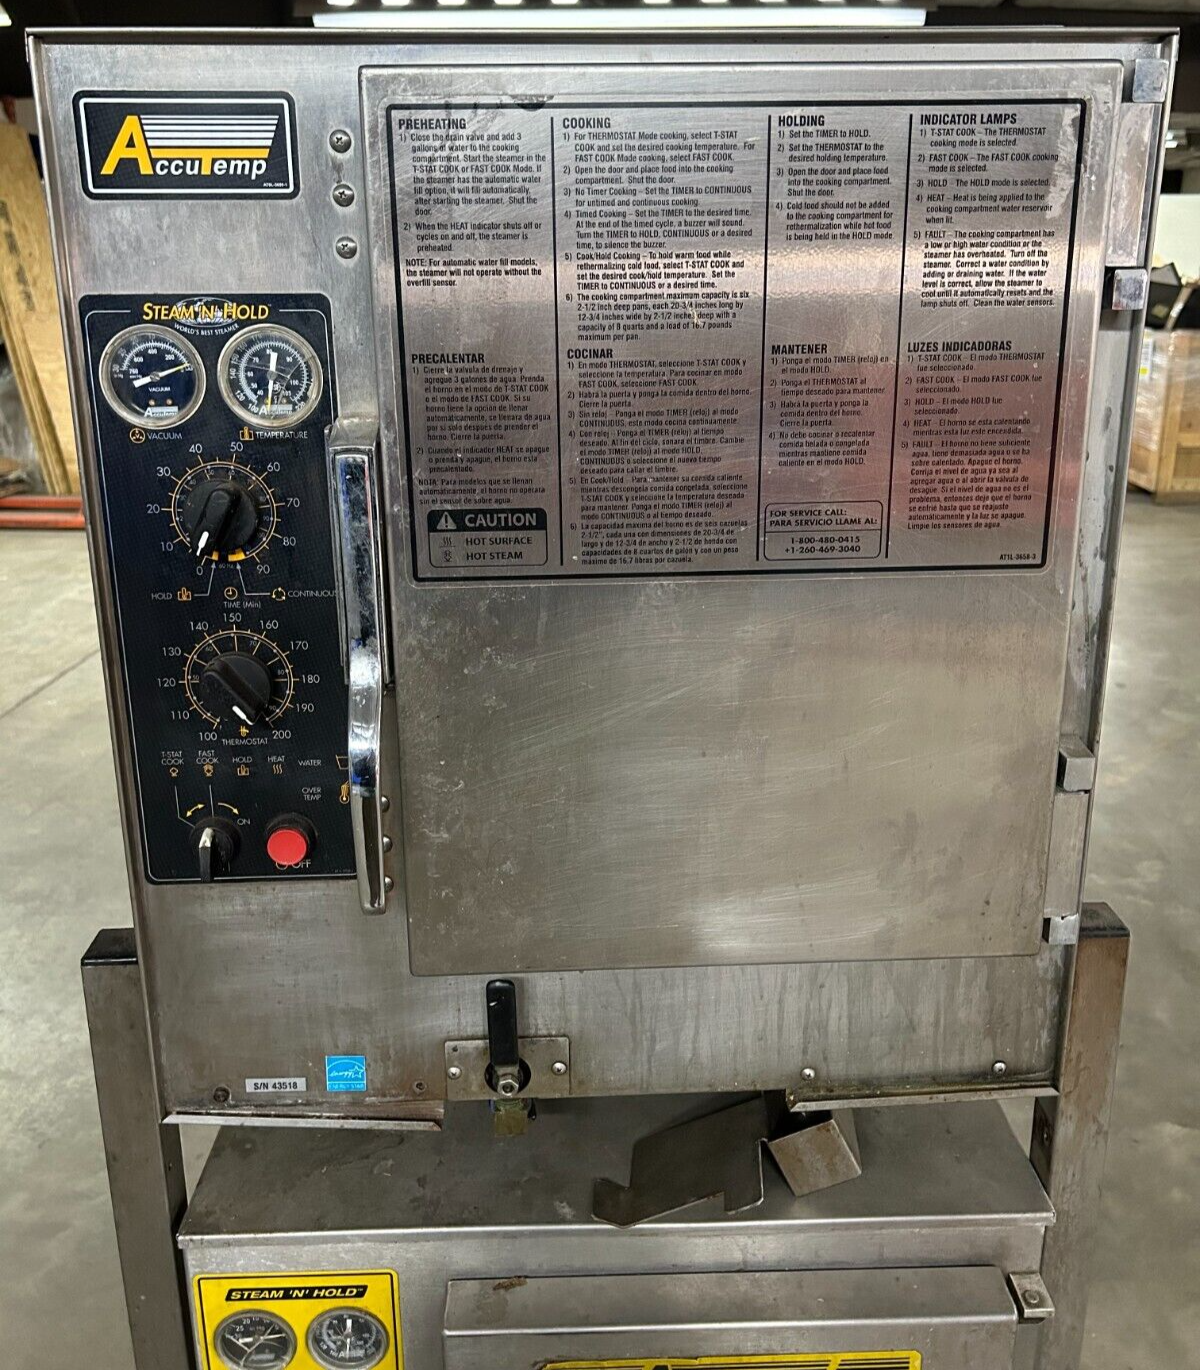 Accutemp Double Stacked Steam 'N' Hold 208V 3 Phase S62083D S62403D